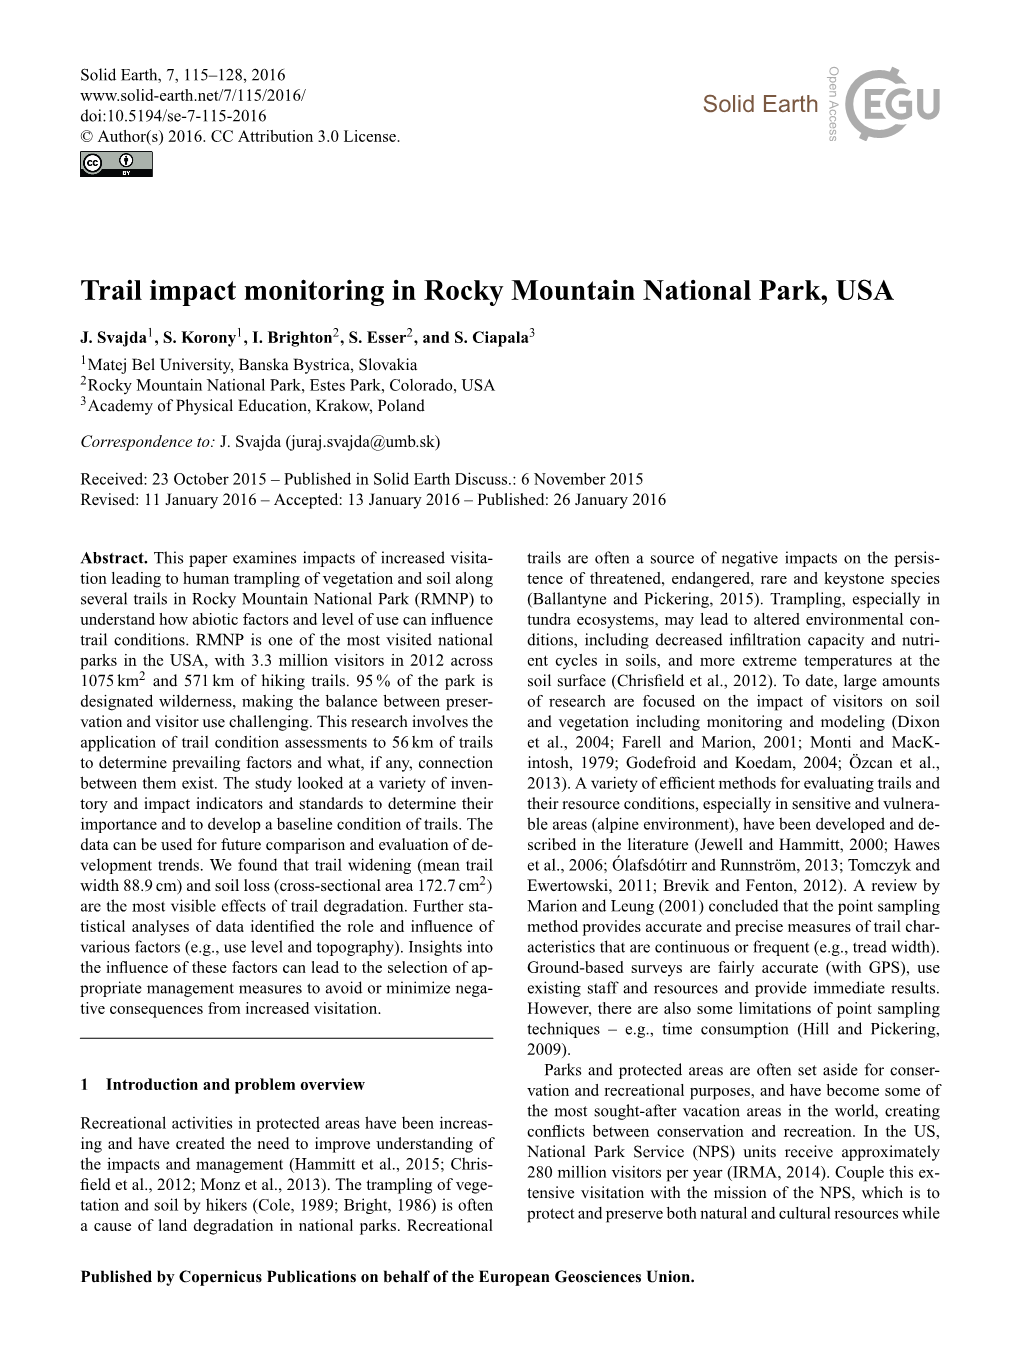 Trail Impact Monitoring in Rocky Mountain National Park, USA